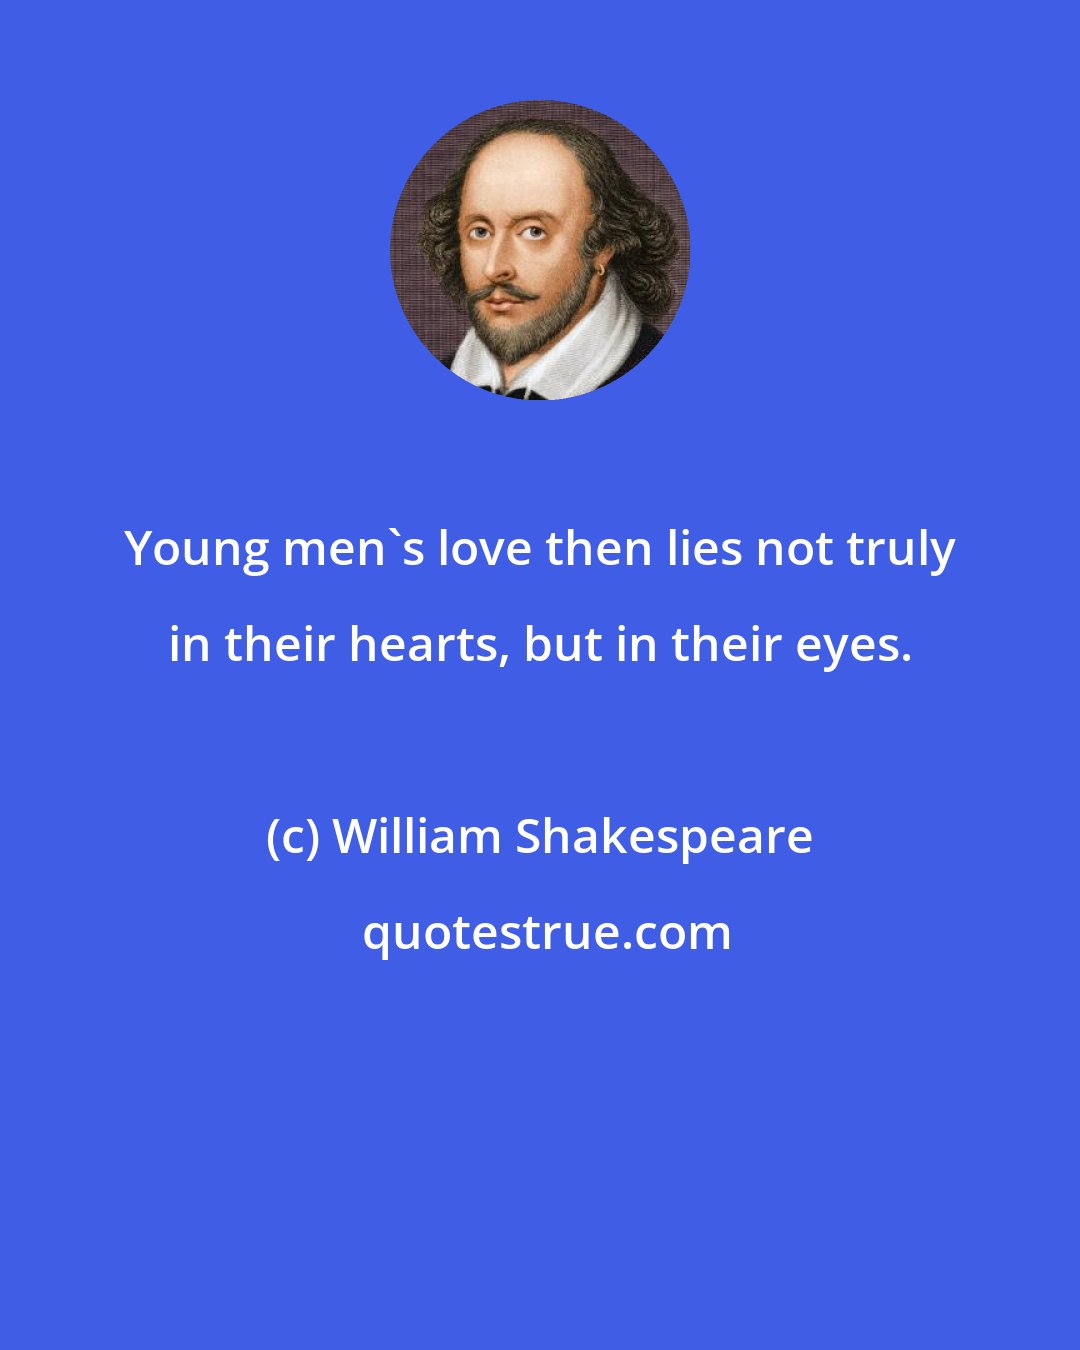 William Shakespeare: Young men's love then lies not truly in their hearts, but in their eyes.